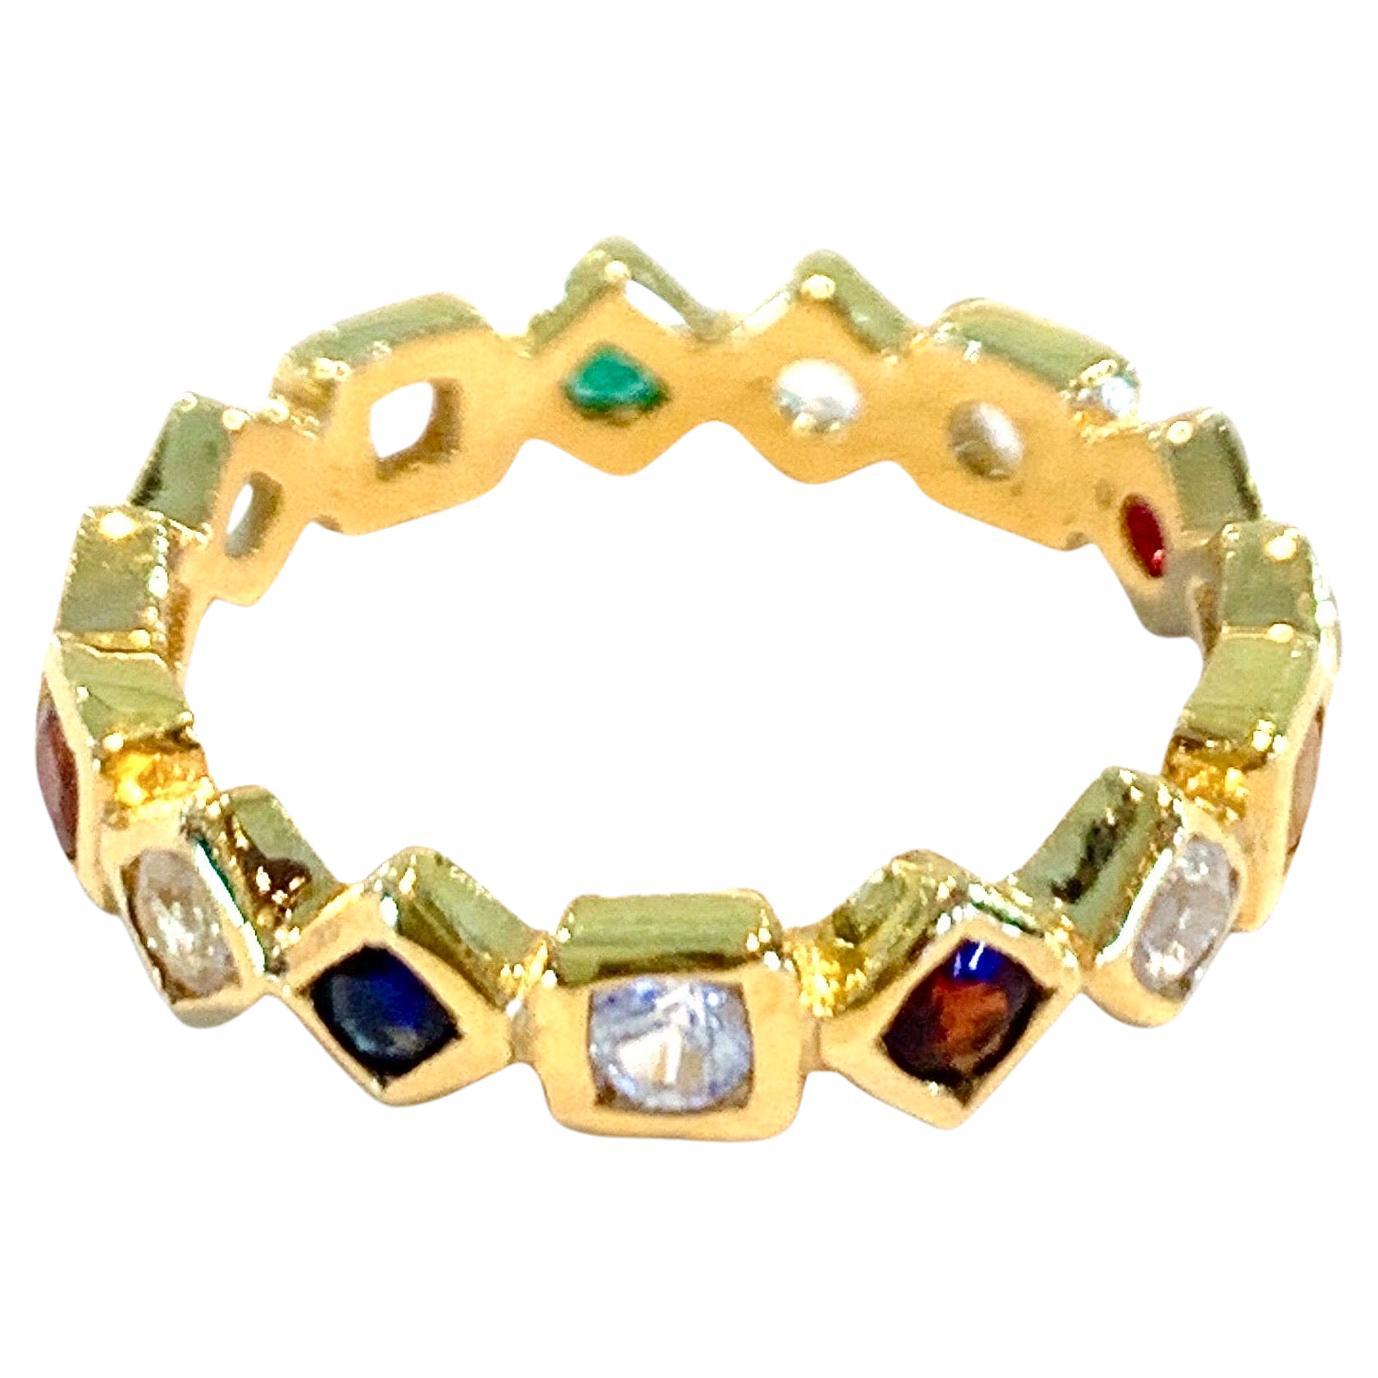 Bochic Good Luck Gem Charm Band 
The believe that wearing Nine-gems ring will bring a good fortune prosperity and luck to the wearer.
Nine- gems are comprised of diamond, ruby, emerald, yellow sapphire, blue sapphire, moonstone, zircon and cat's